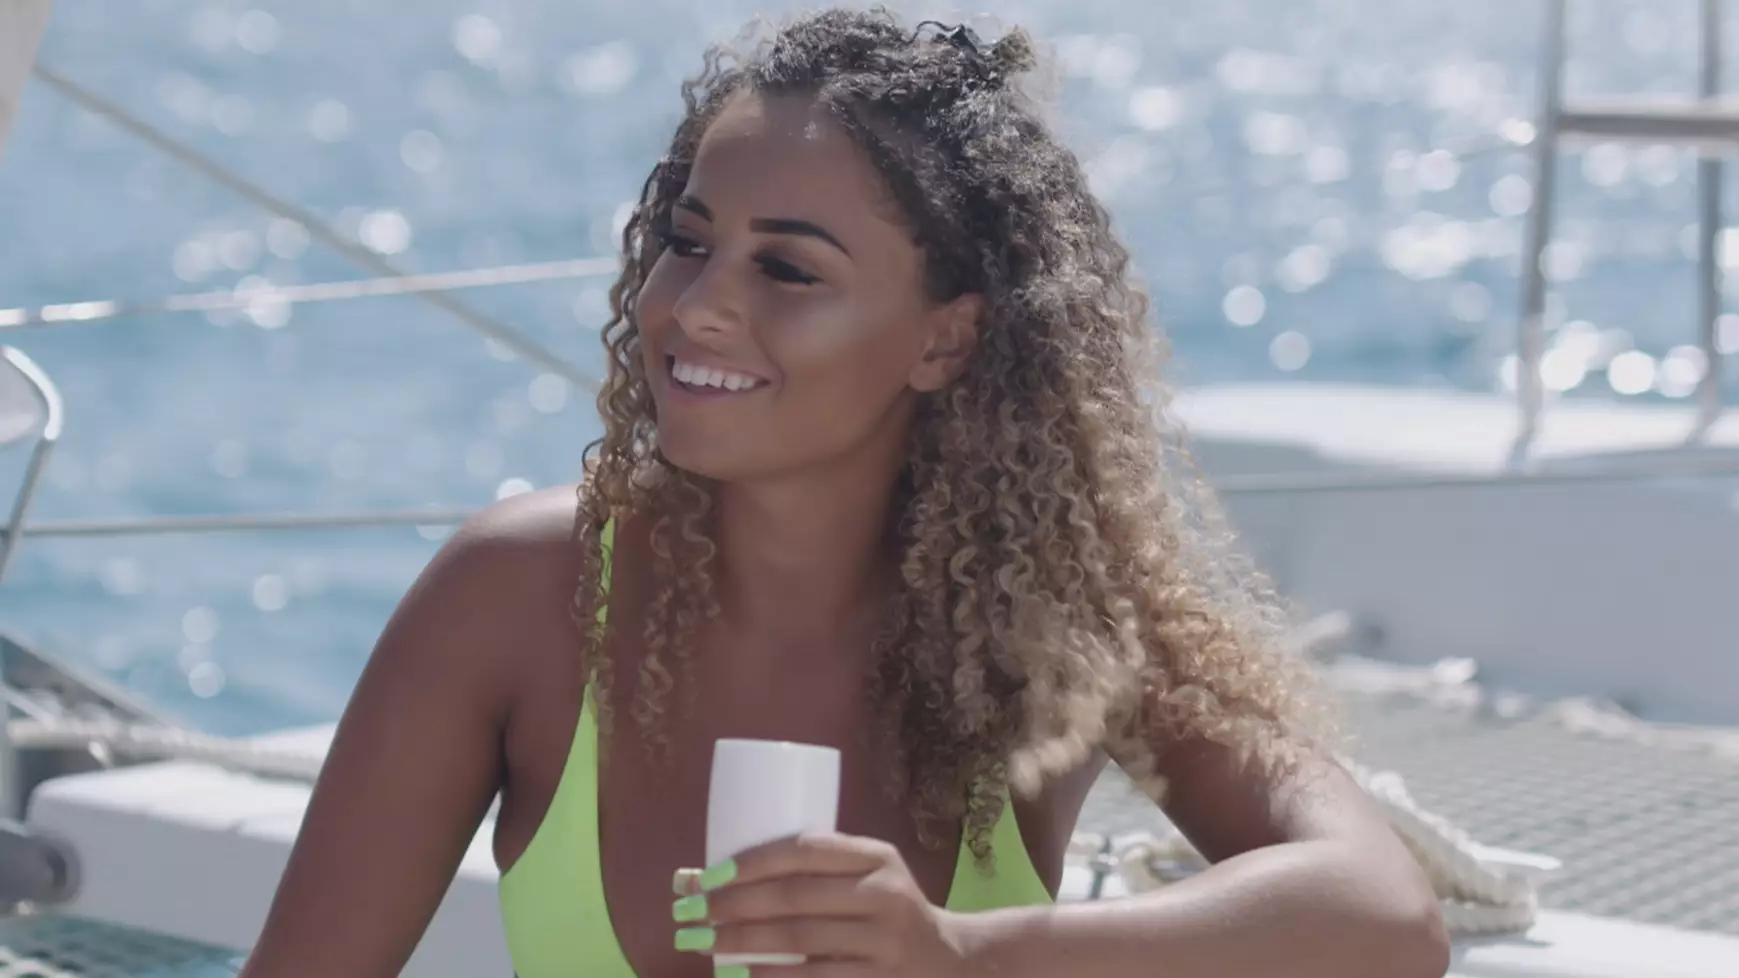 'Love Island': Amber Gill's Transformation Is Proof That Toxic Relationships Can Bring Out The Worst In You